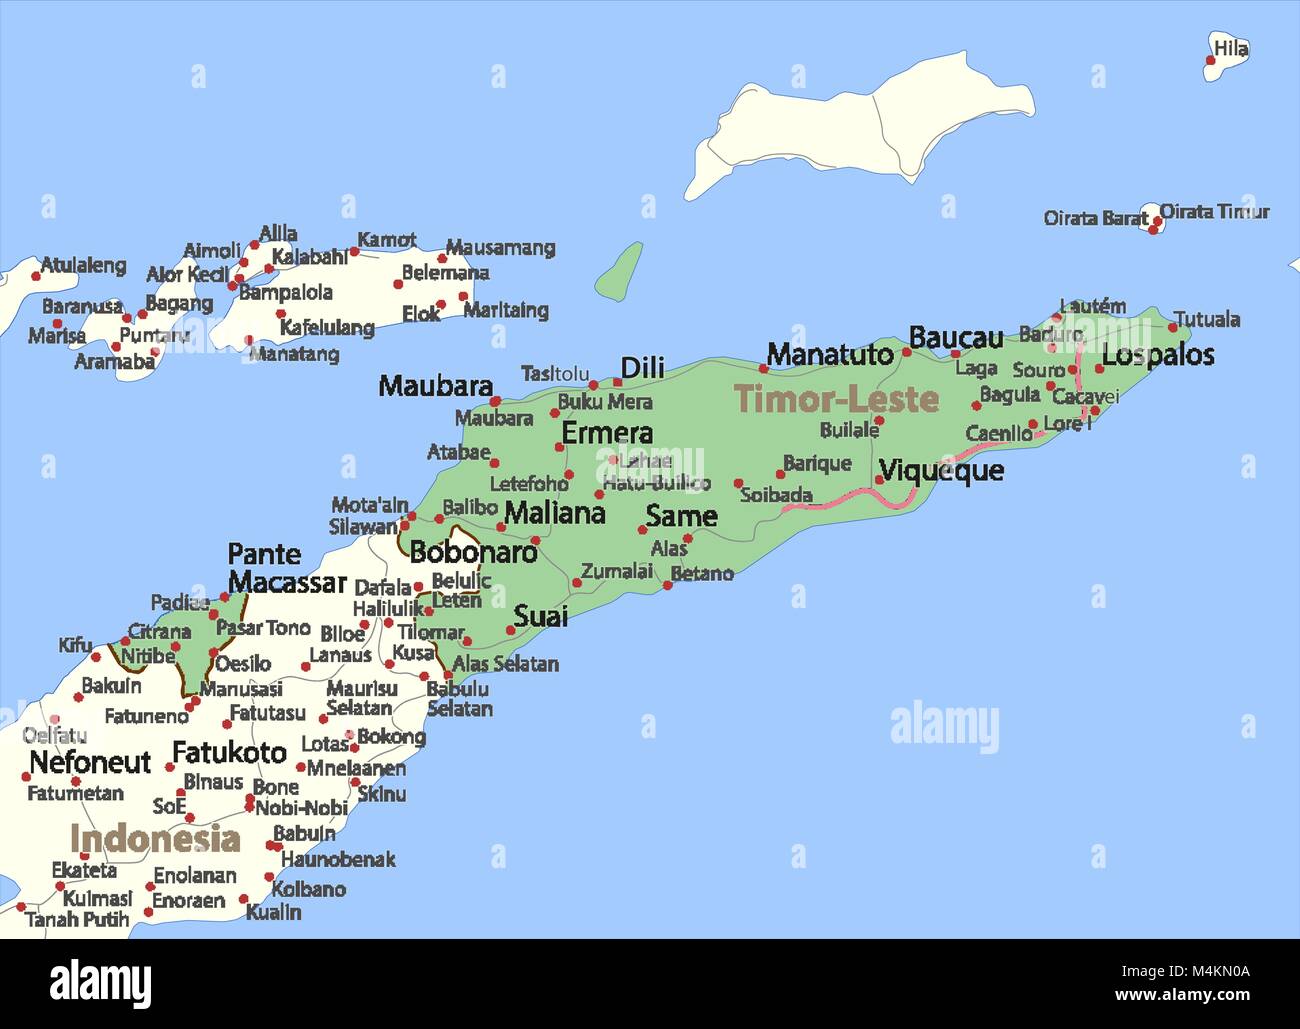 Map of Timor-Leste. Shows country borders, urban areas, place names and roads. Labels in English where possible. Projection: Mercator. Stock Vector